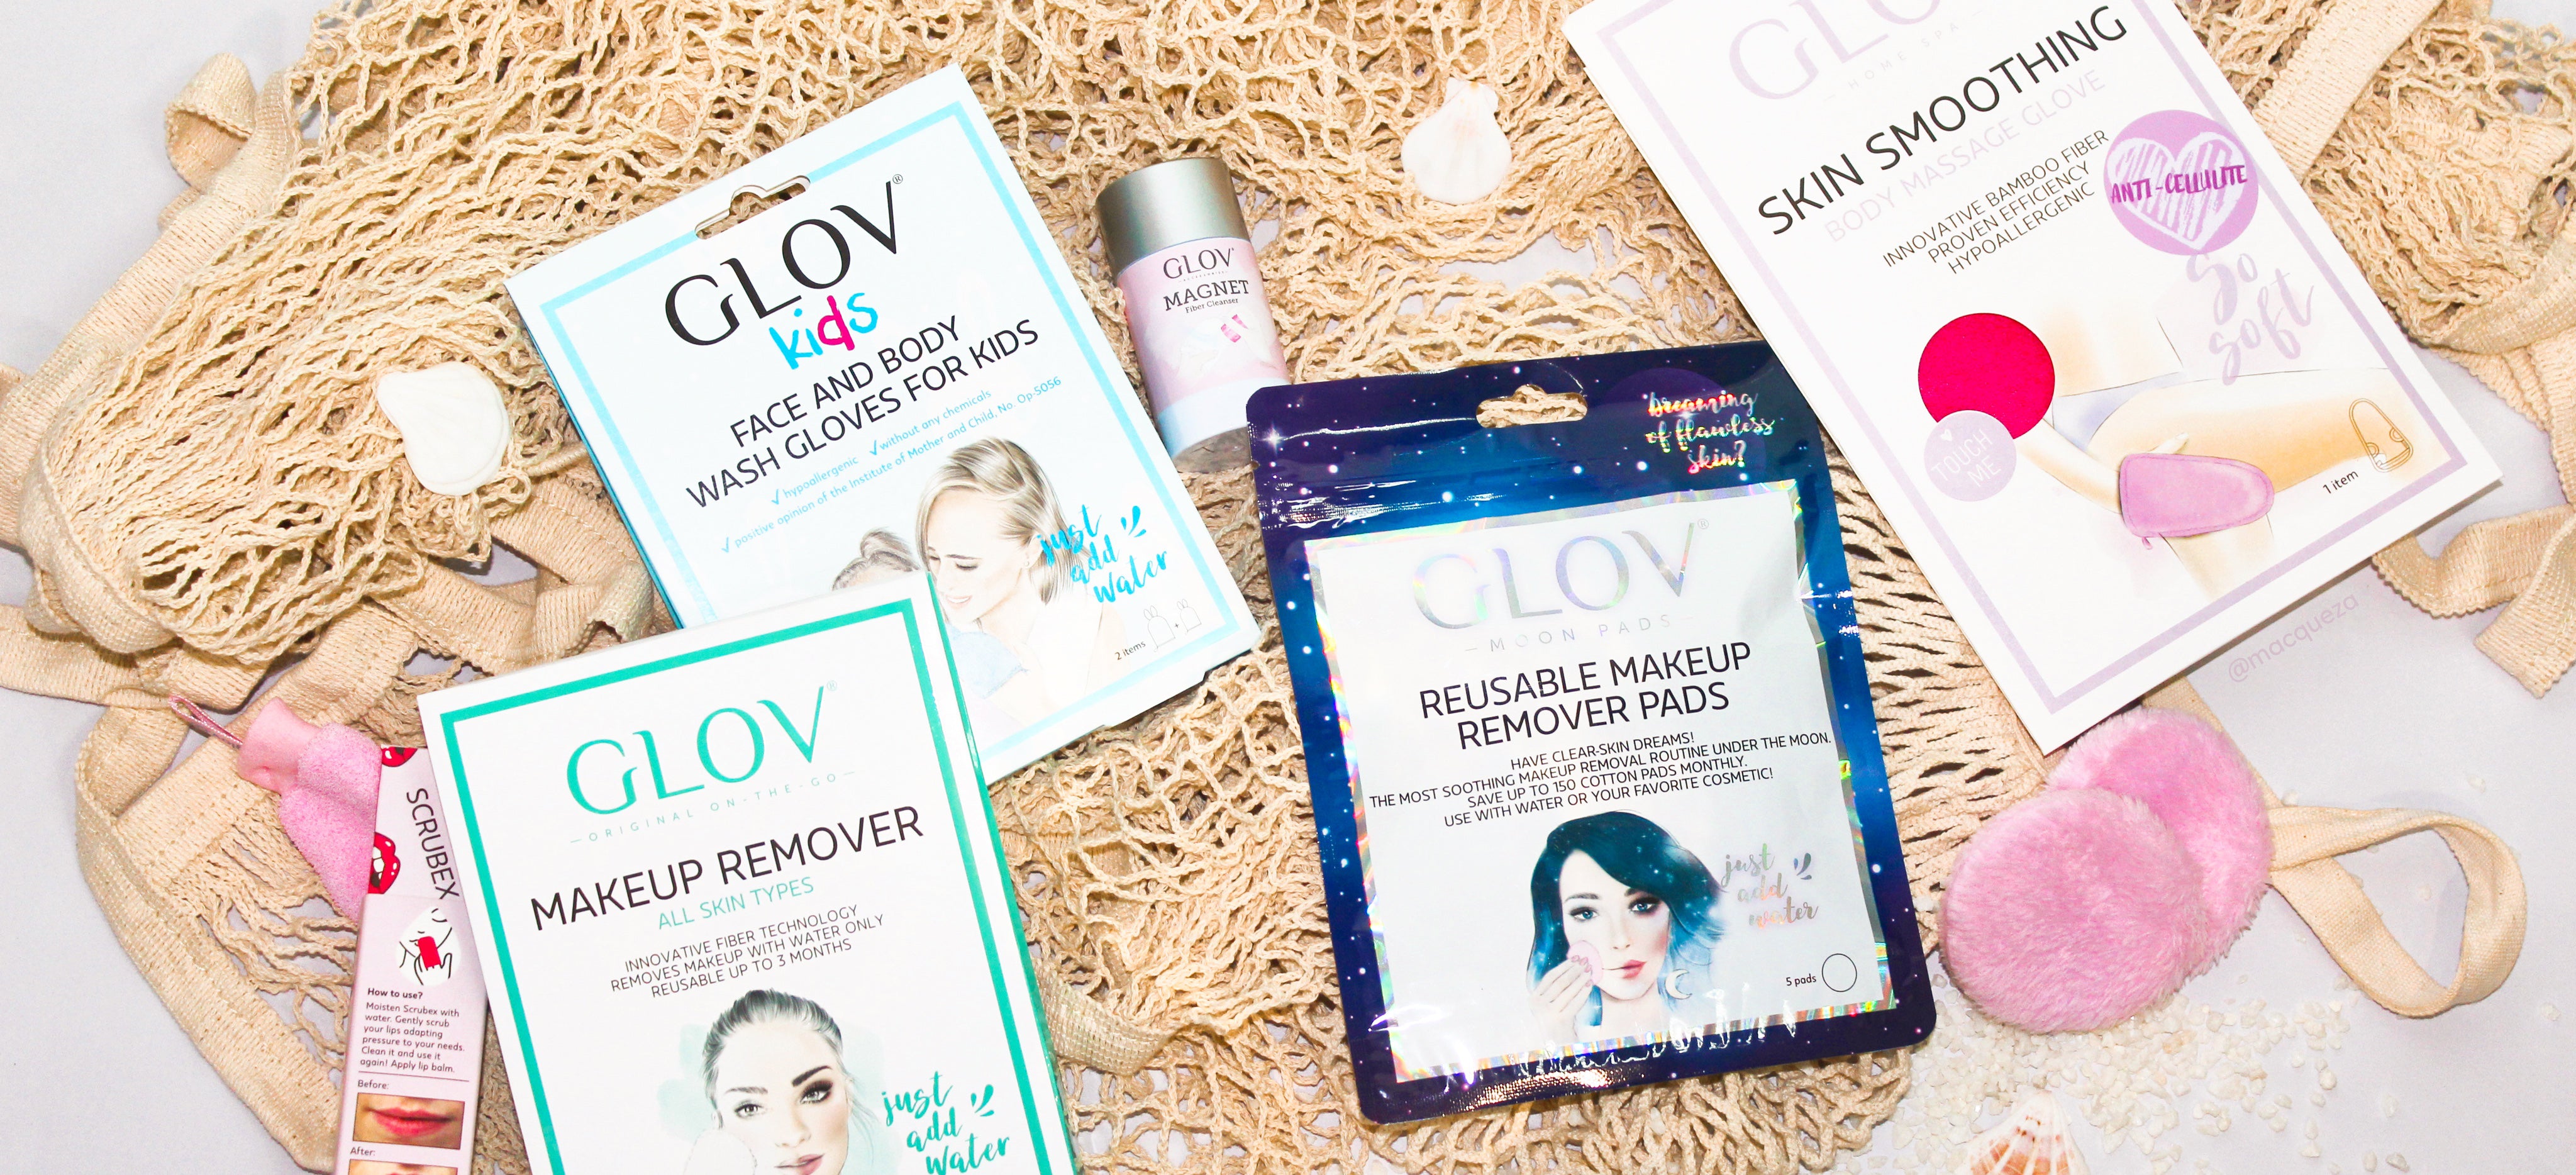 Glov is a European-based vegan and sustainable cosmetic brand designed to meet the needs of the modern world today, and has been internationally recognised for their groundbreaking patented product formula 